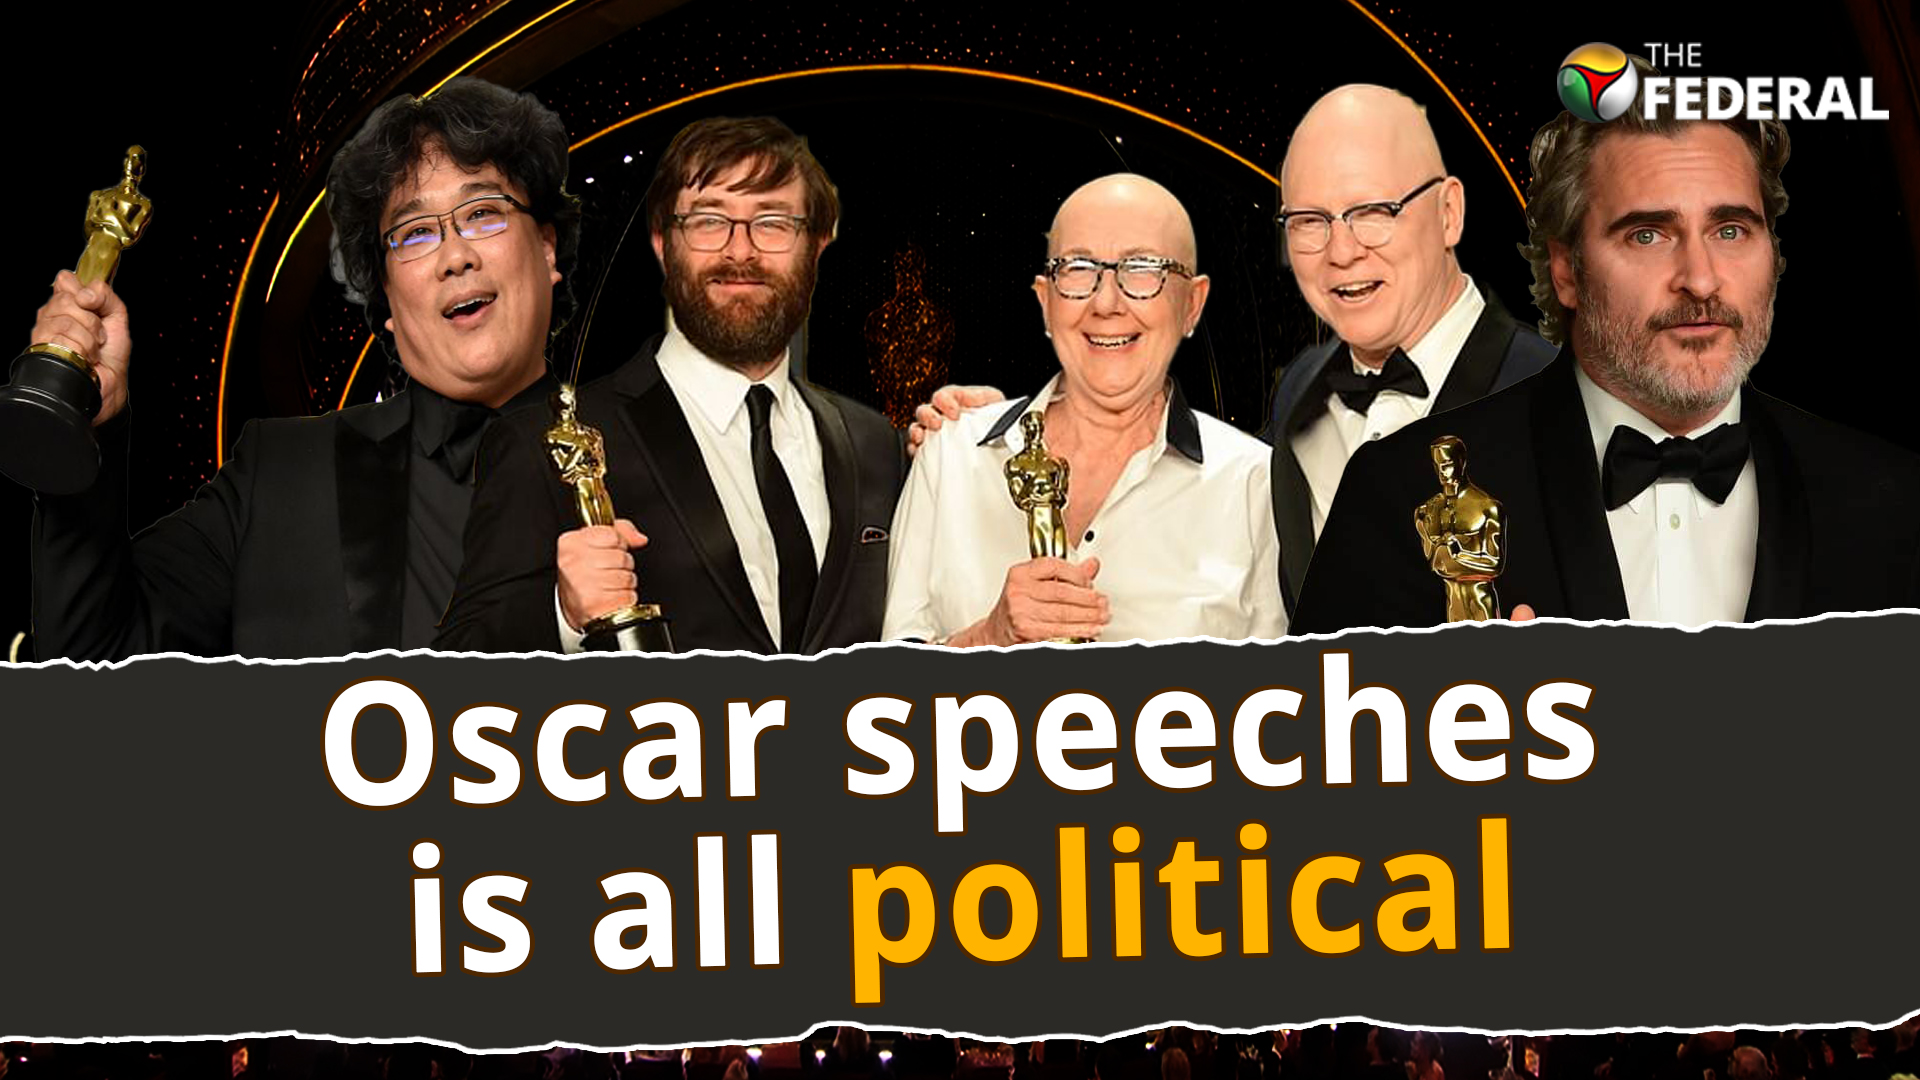 Communist Manifesto to sibling verse: Oscar speeches is all political